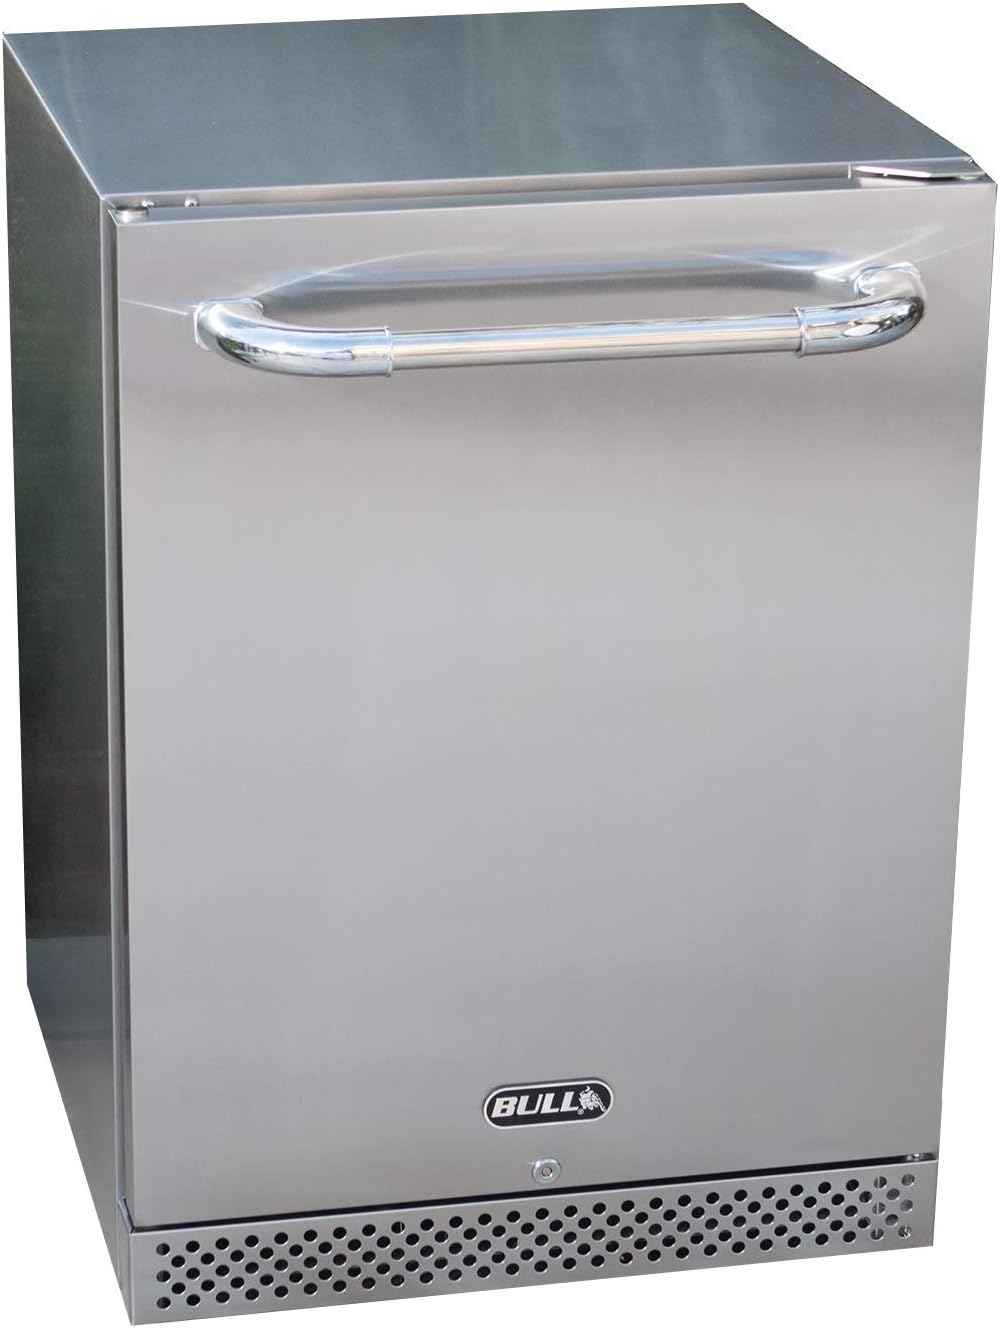 BULL OUTDOOR PRODUCTS Premium Outdoor Rated 4.9 Cu Ft Stainless Steel Fridge Series II